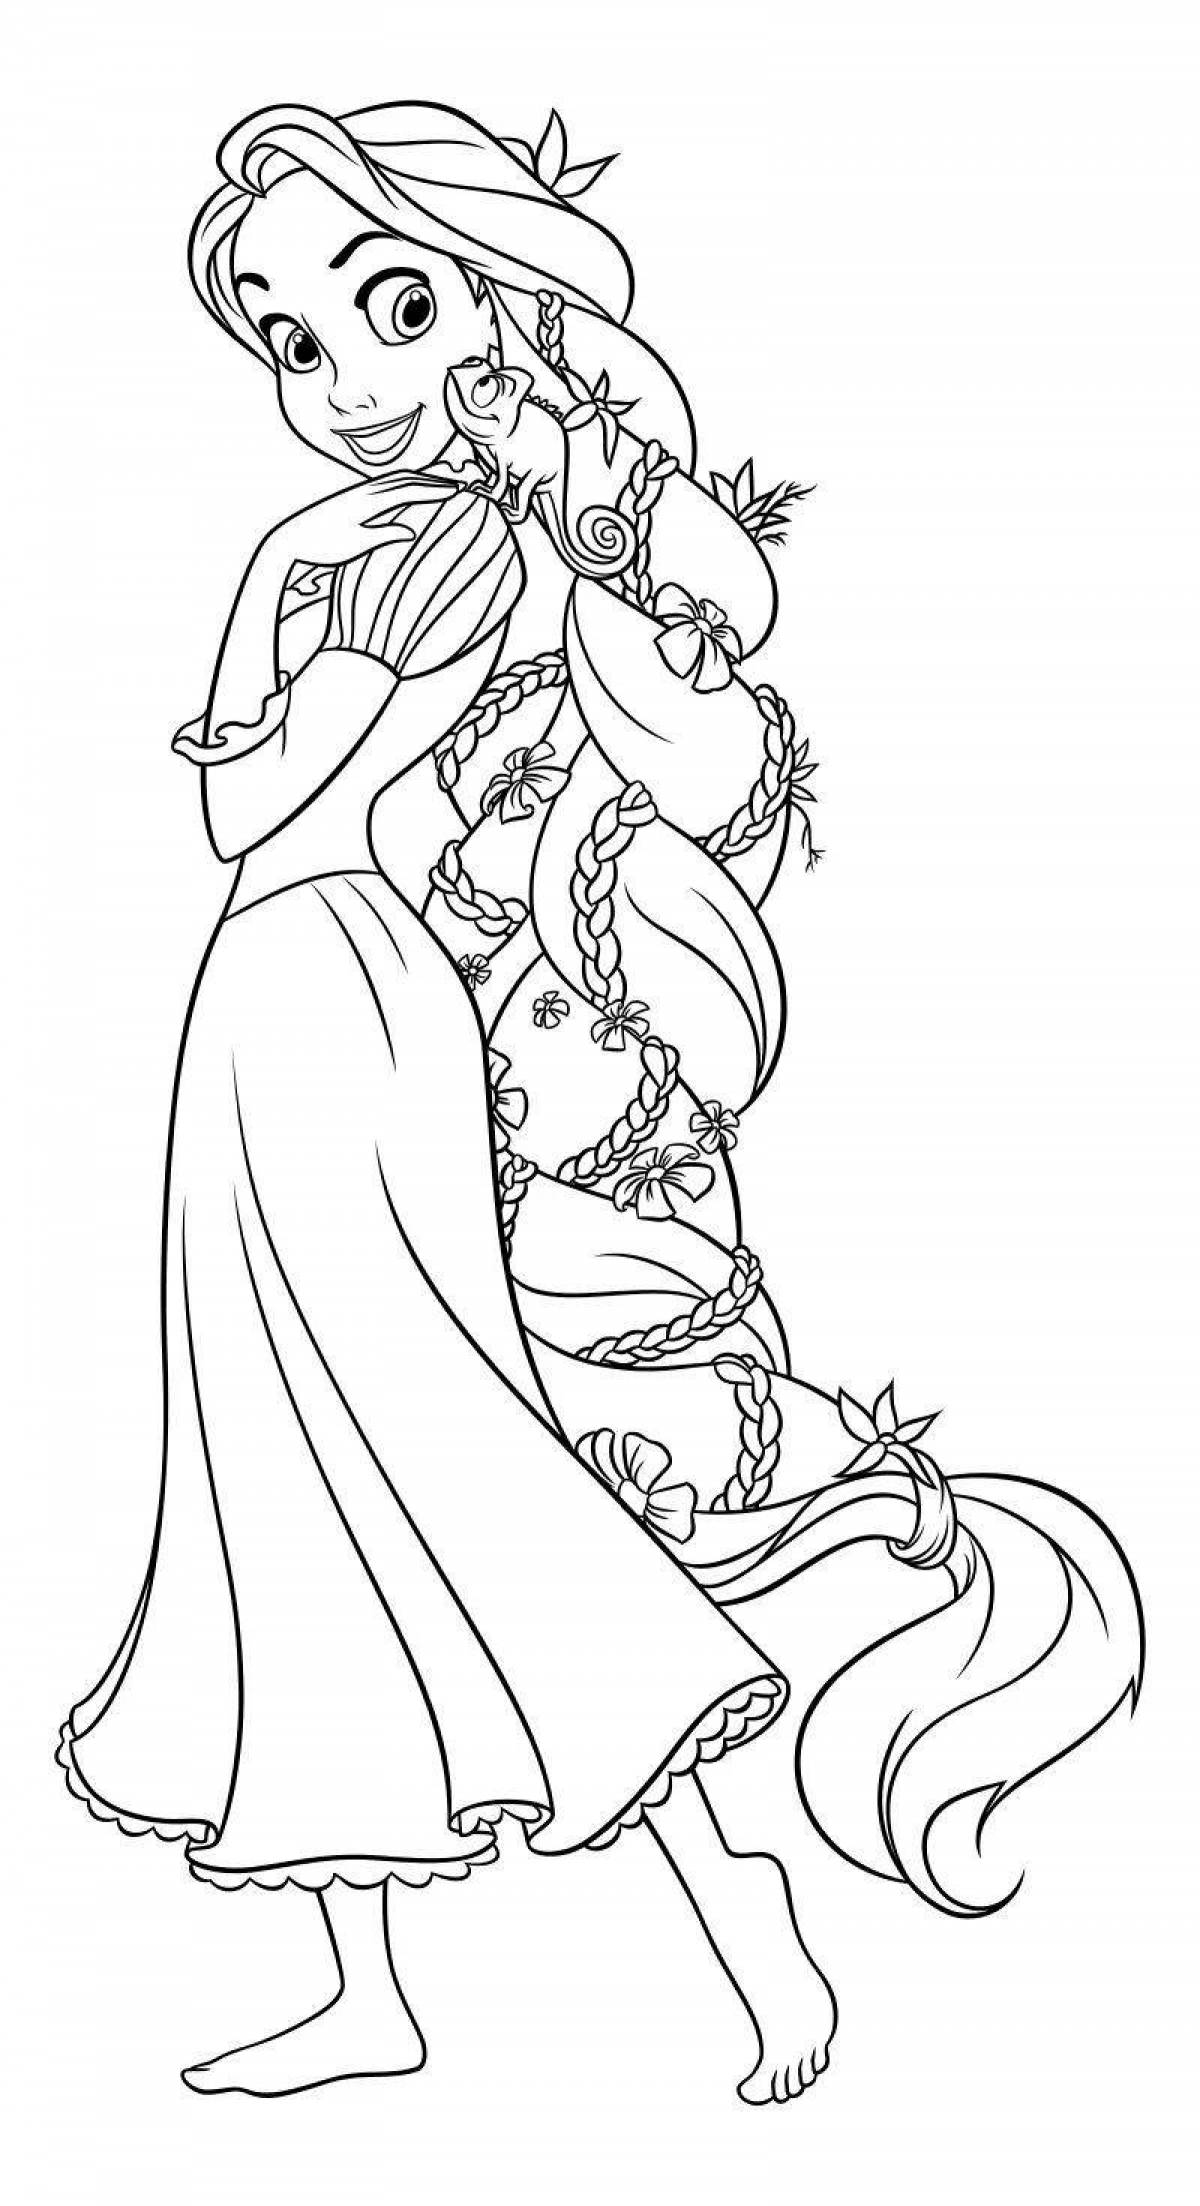 Great rapunzel coloring game